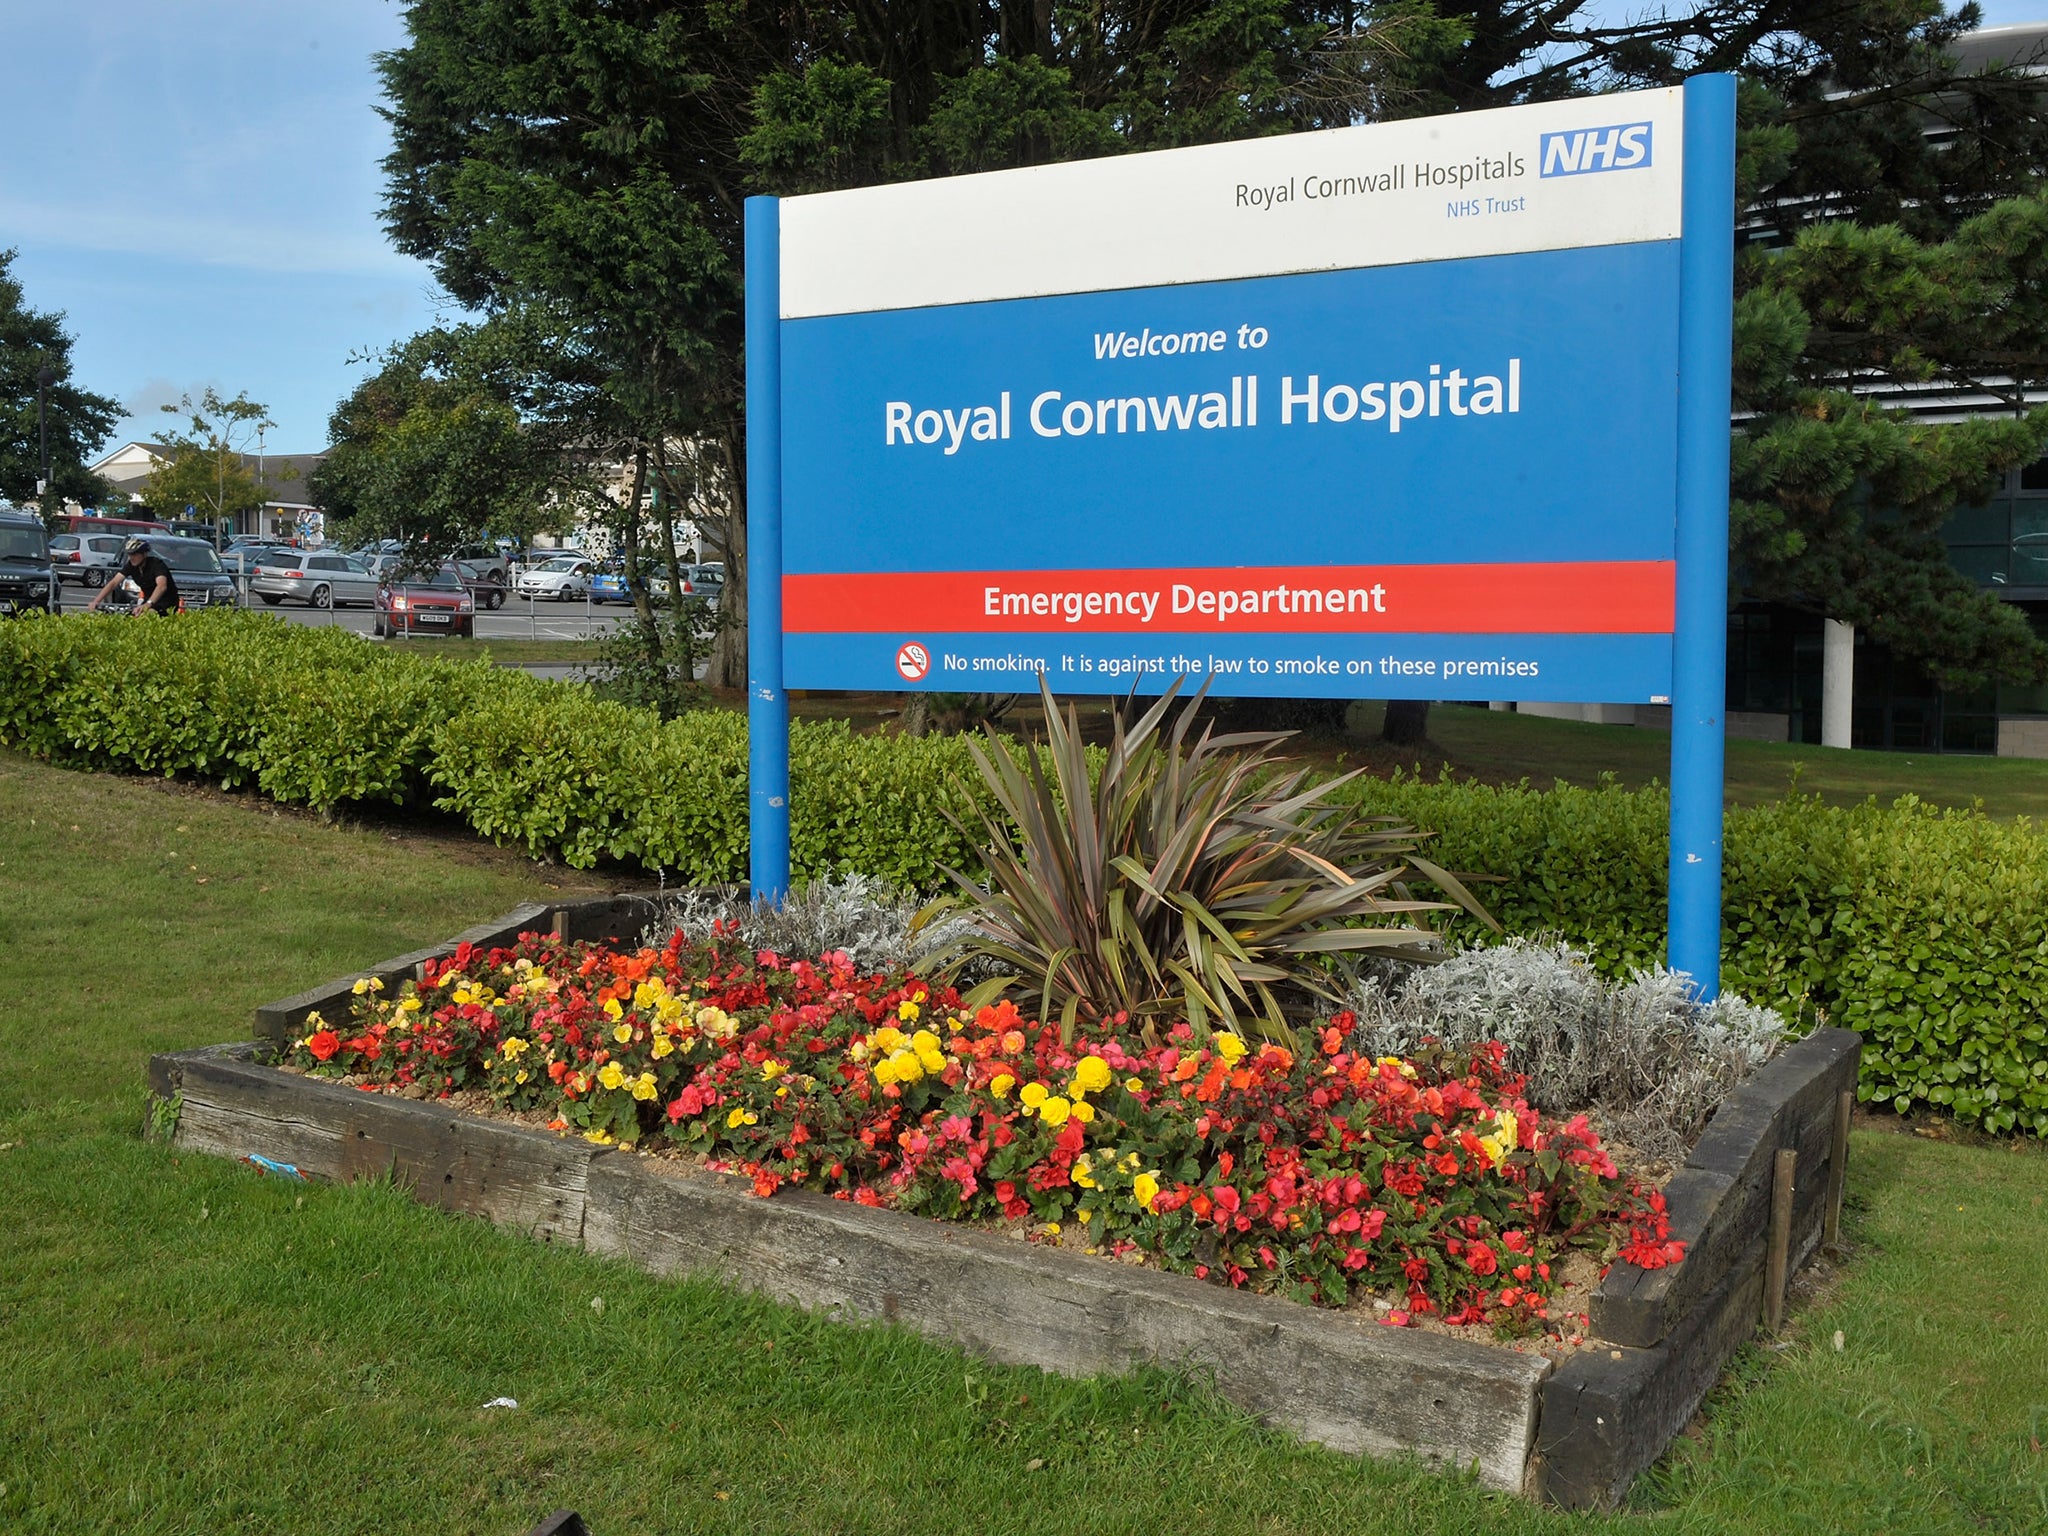 The devolution deal would see Cornwall follow Greater Manchester as the second English region to bring its NHS and council-funded care services together under one budget